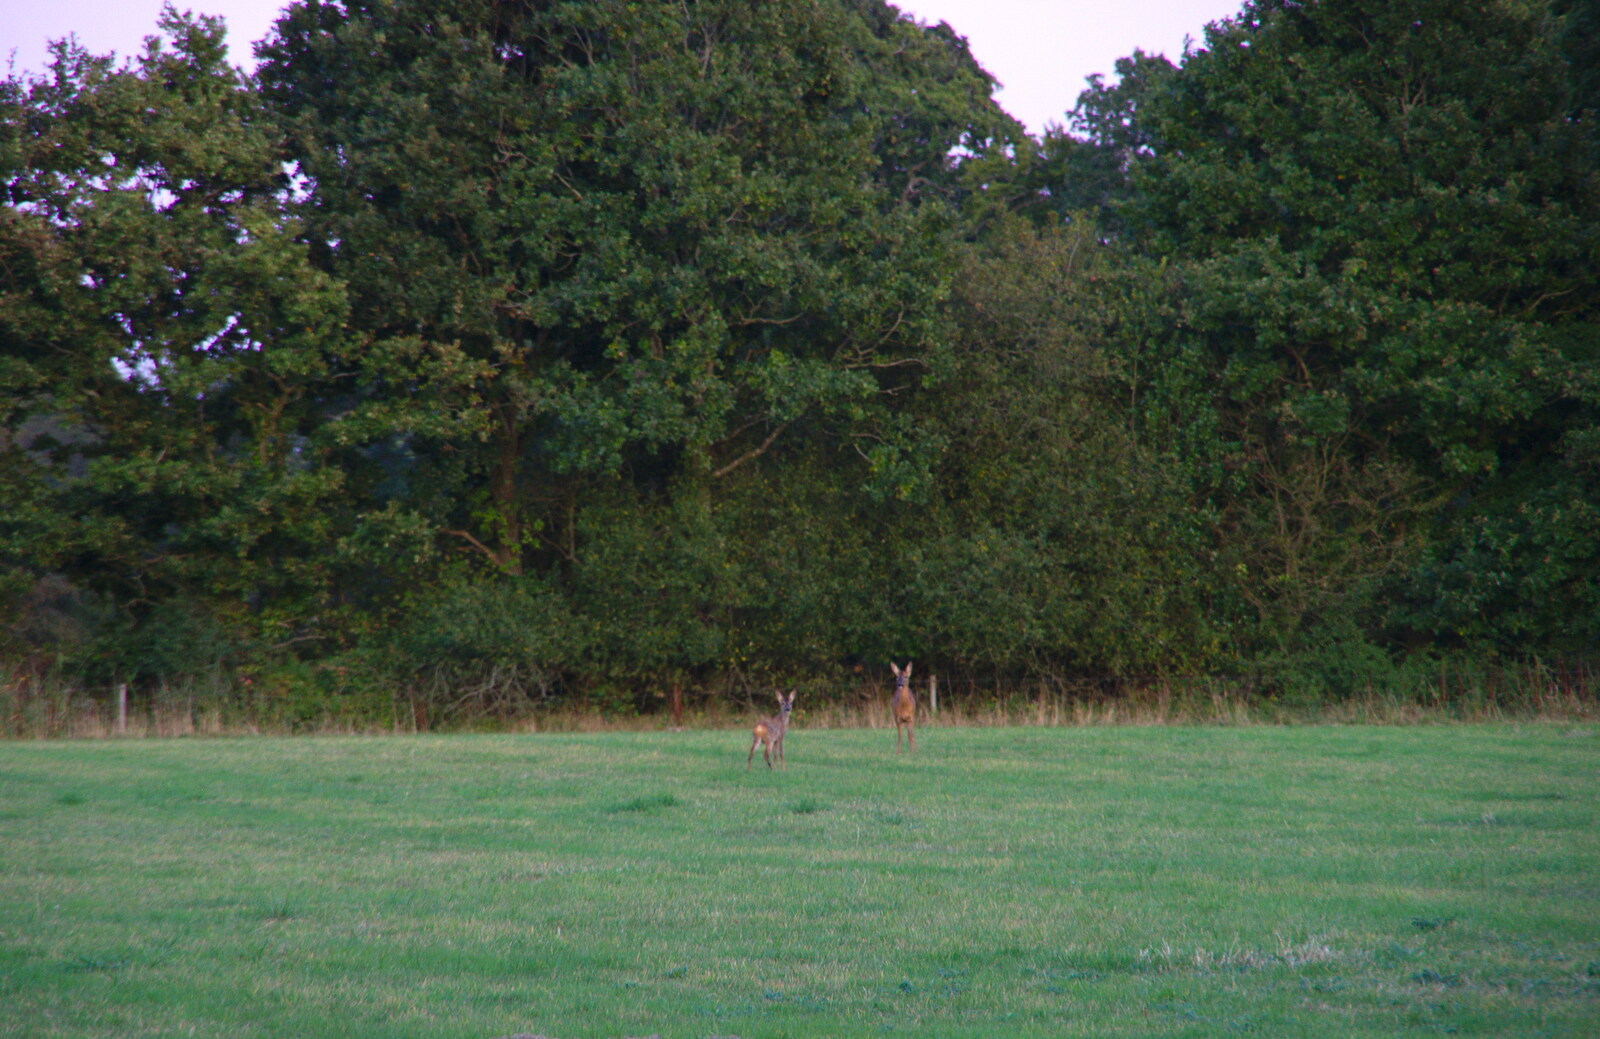 There are deer on the old Harrow Vineyard site from Neil and Martina's Wedding, The Three Tuns, Bransgore, Dorset - 20th September 2019